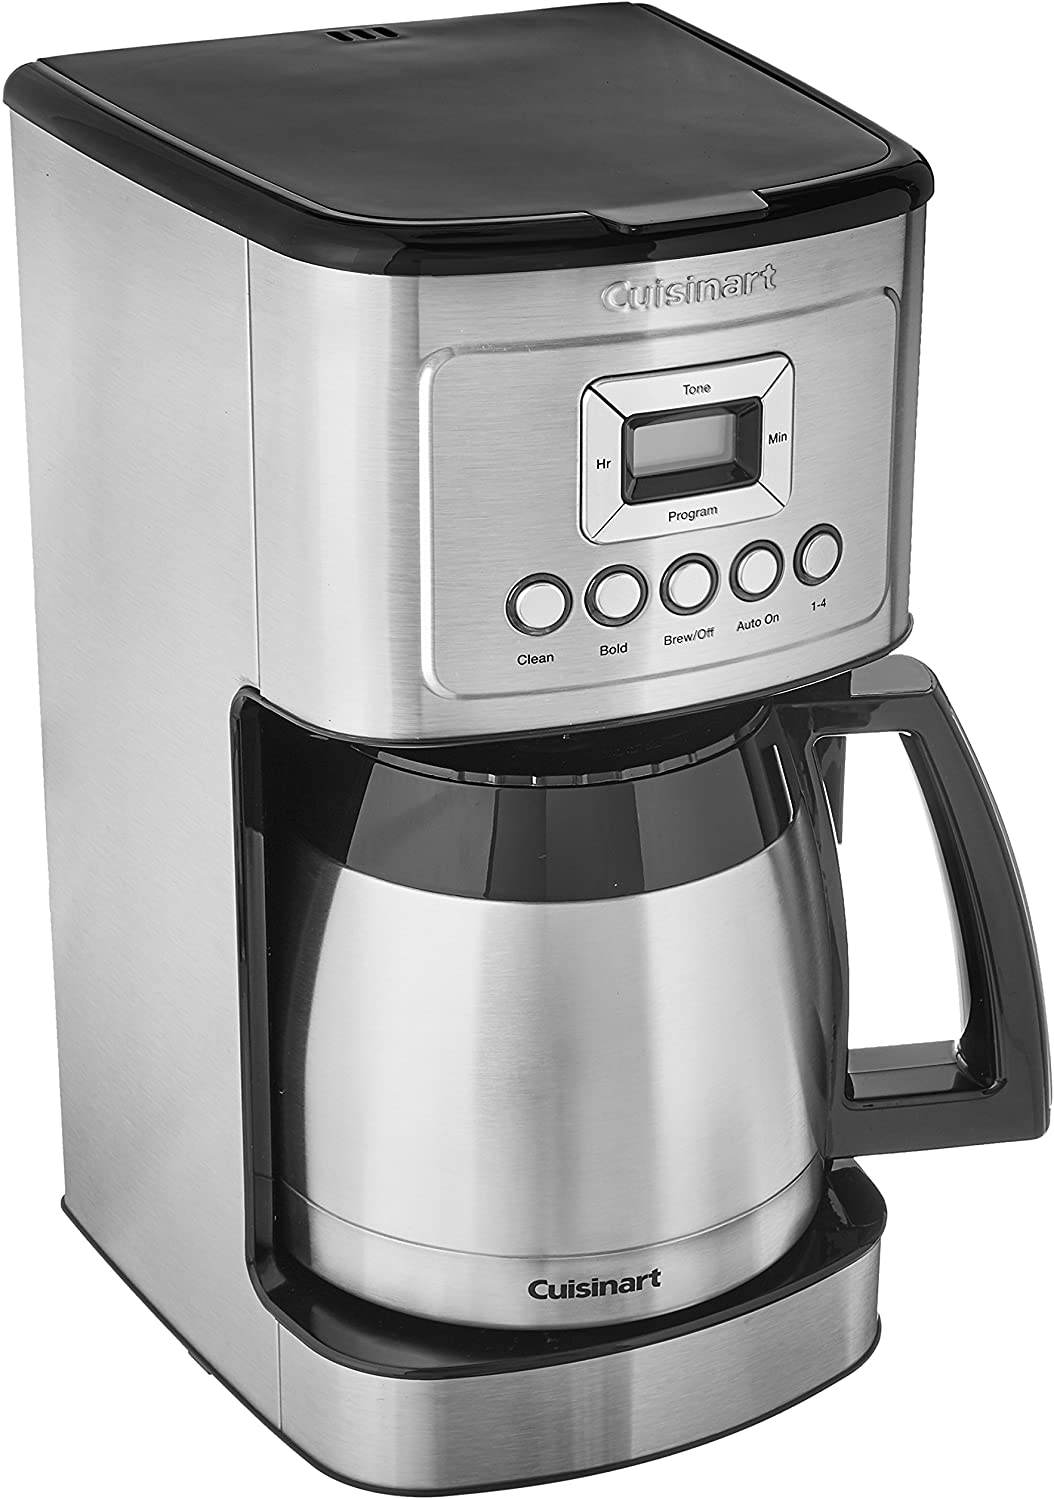 How to reset Cuisinart coffee maker